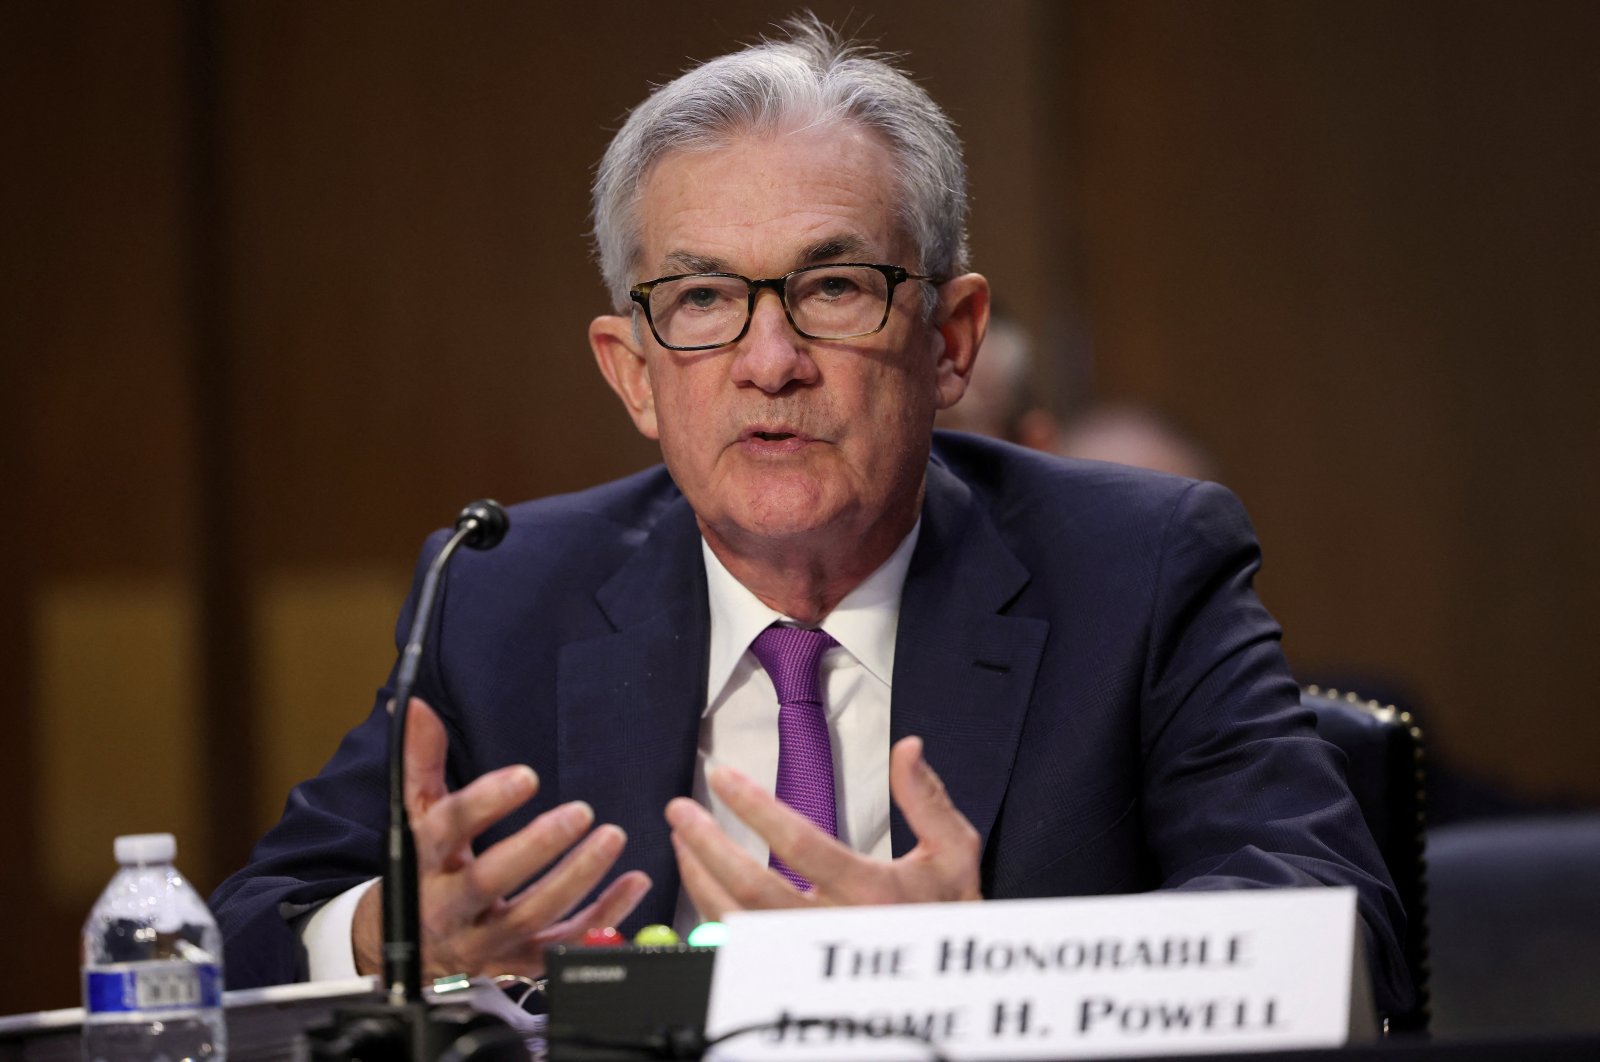 Federal Reserve Chair Jerome Powell testifies during a Senate Banking, Housing and Urban Affairs Committee hearing on the CARES Act, at the Hart Senate Office Building in Washington, DC, U.S., September 28, 2021. (Kevin Dietsch / Pool via Reuters)